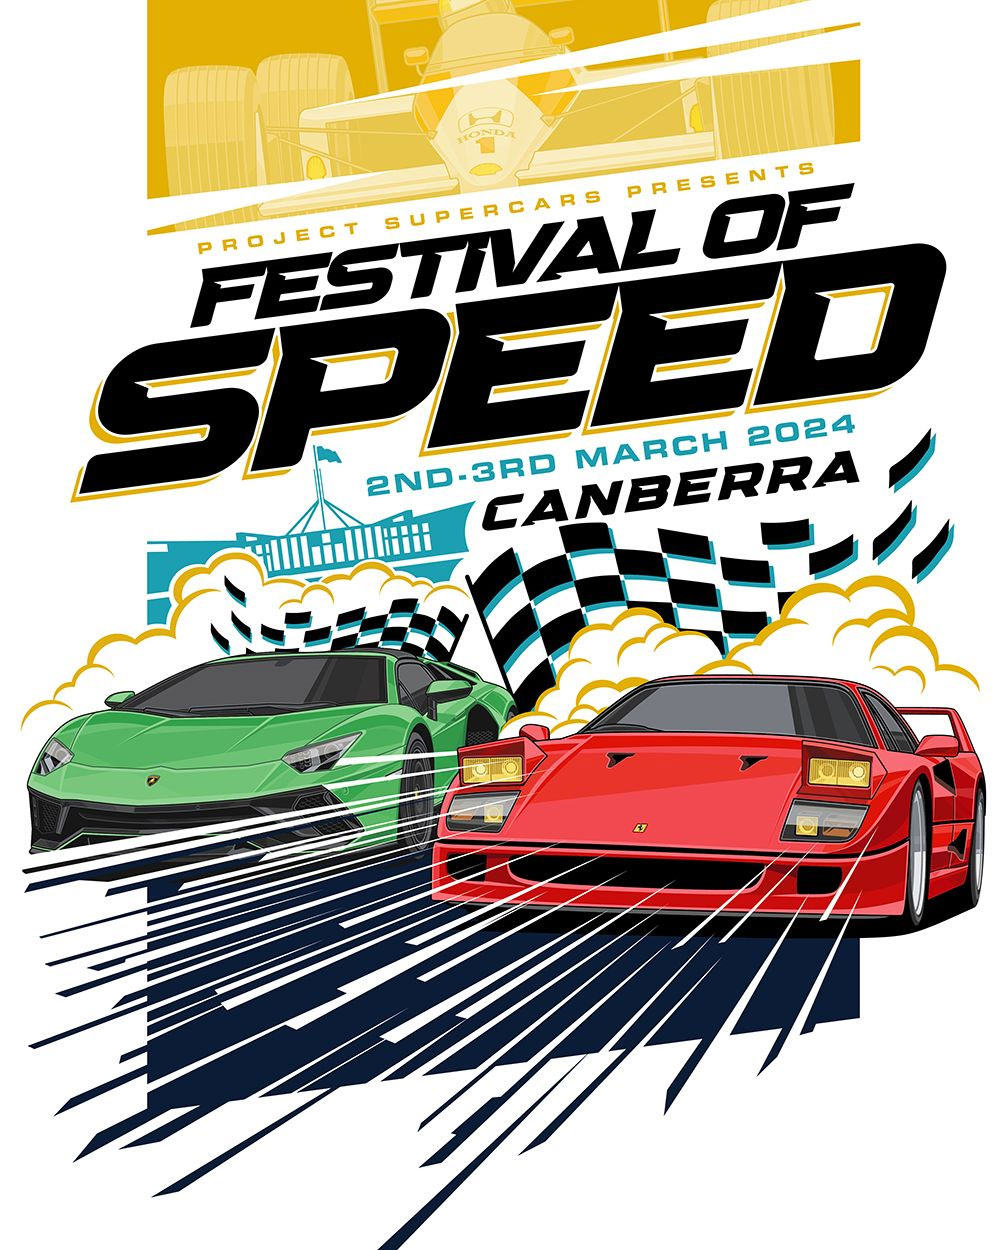 Canberra Festival of Speed